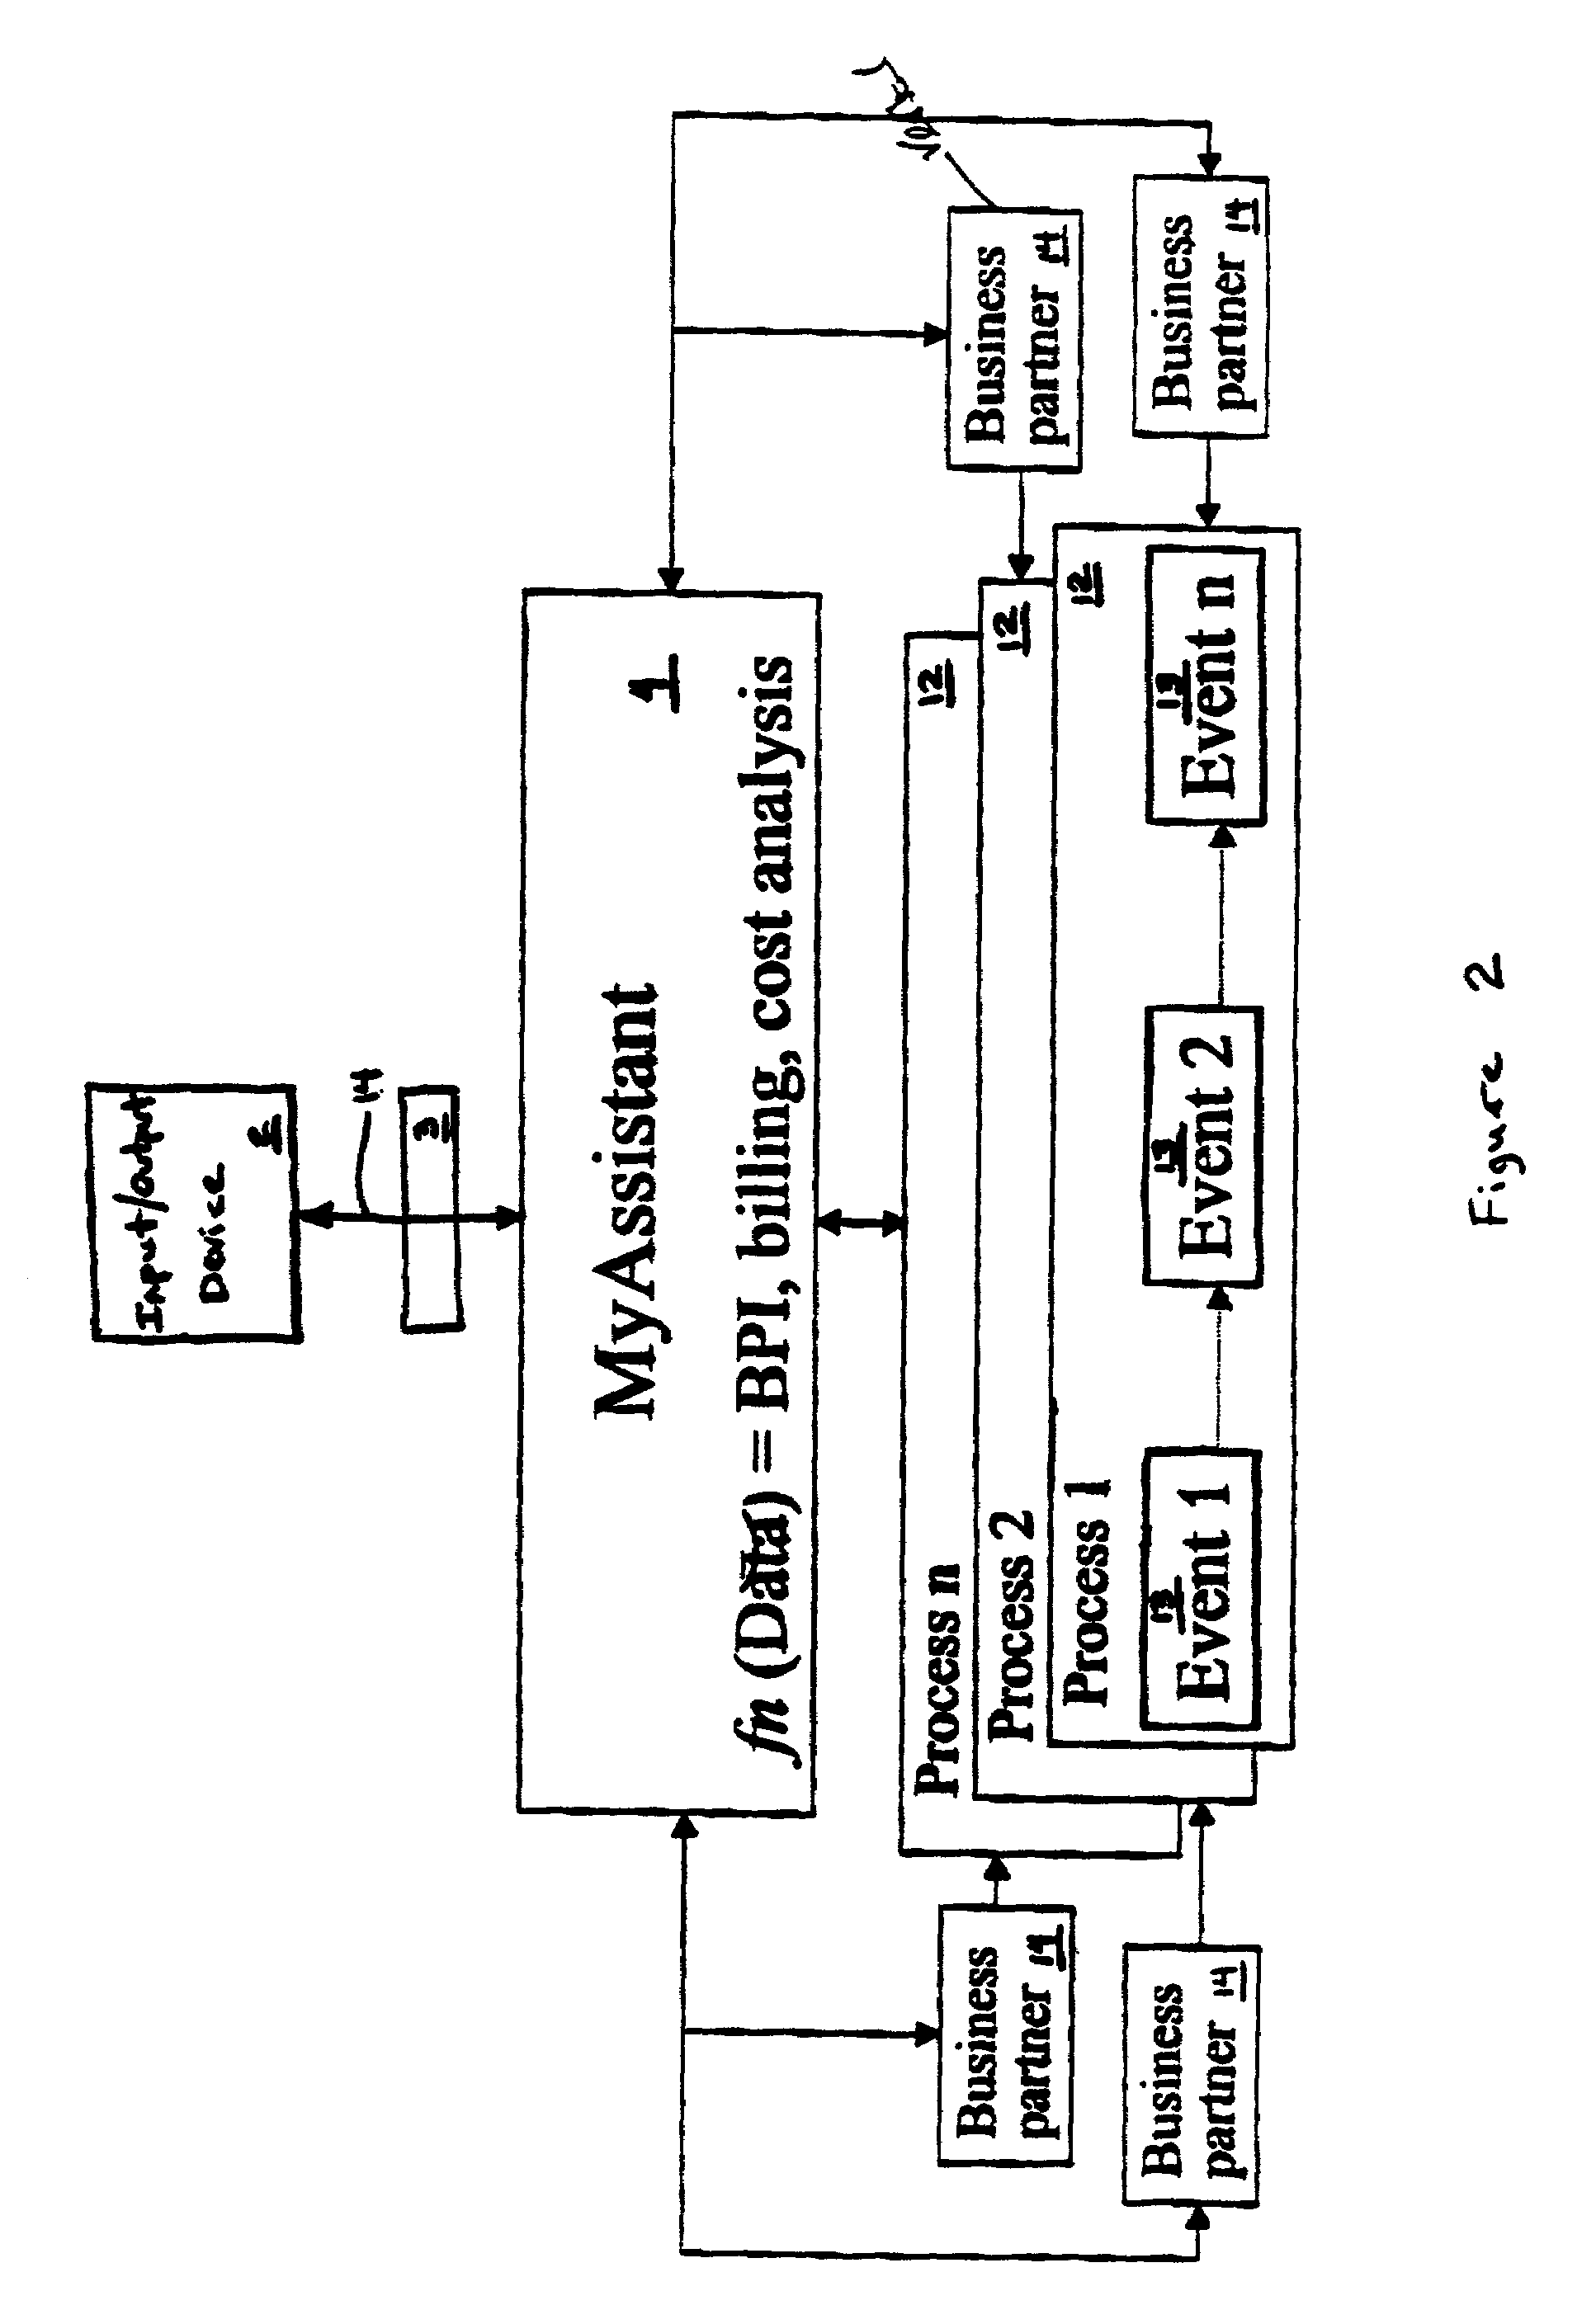 System and method for scheduling events and associated products and services